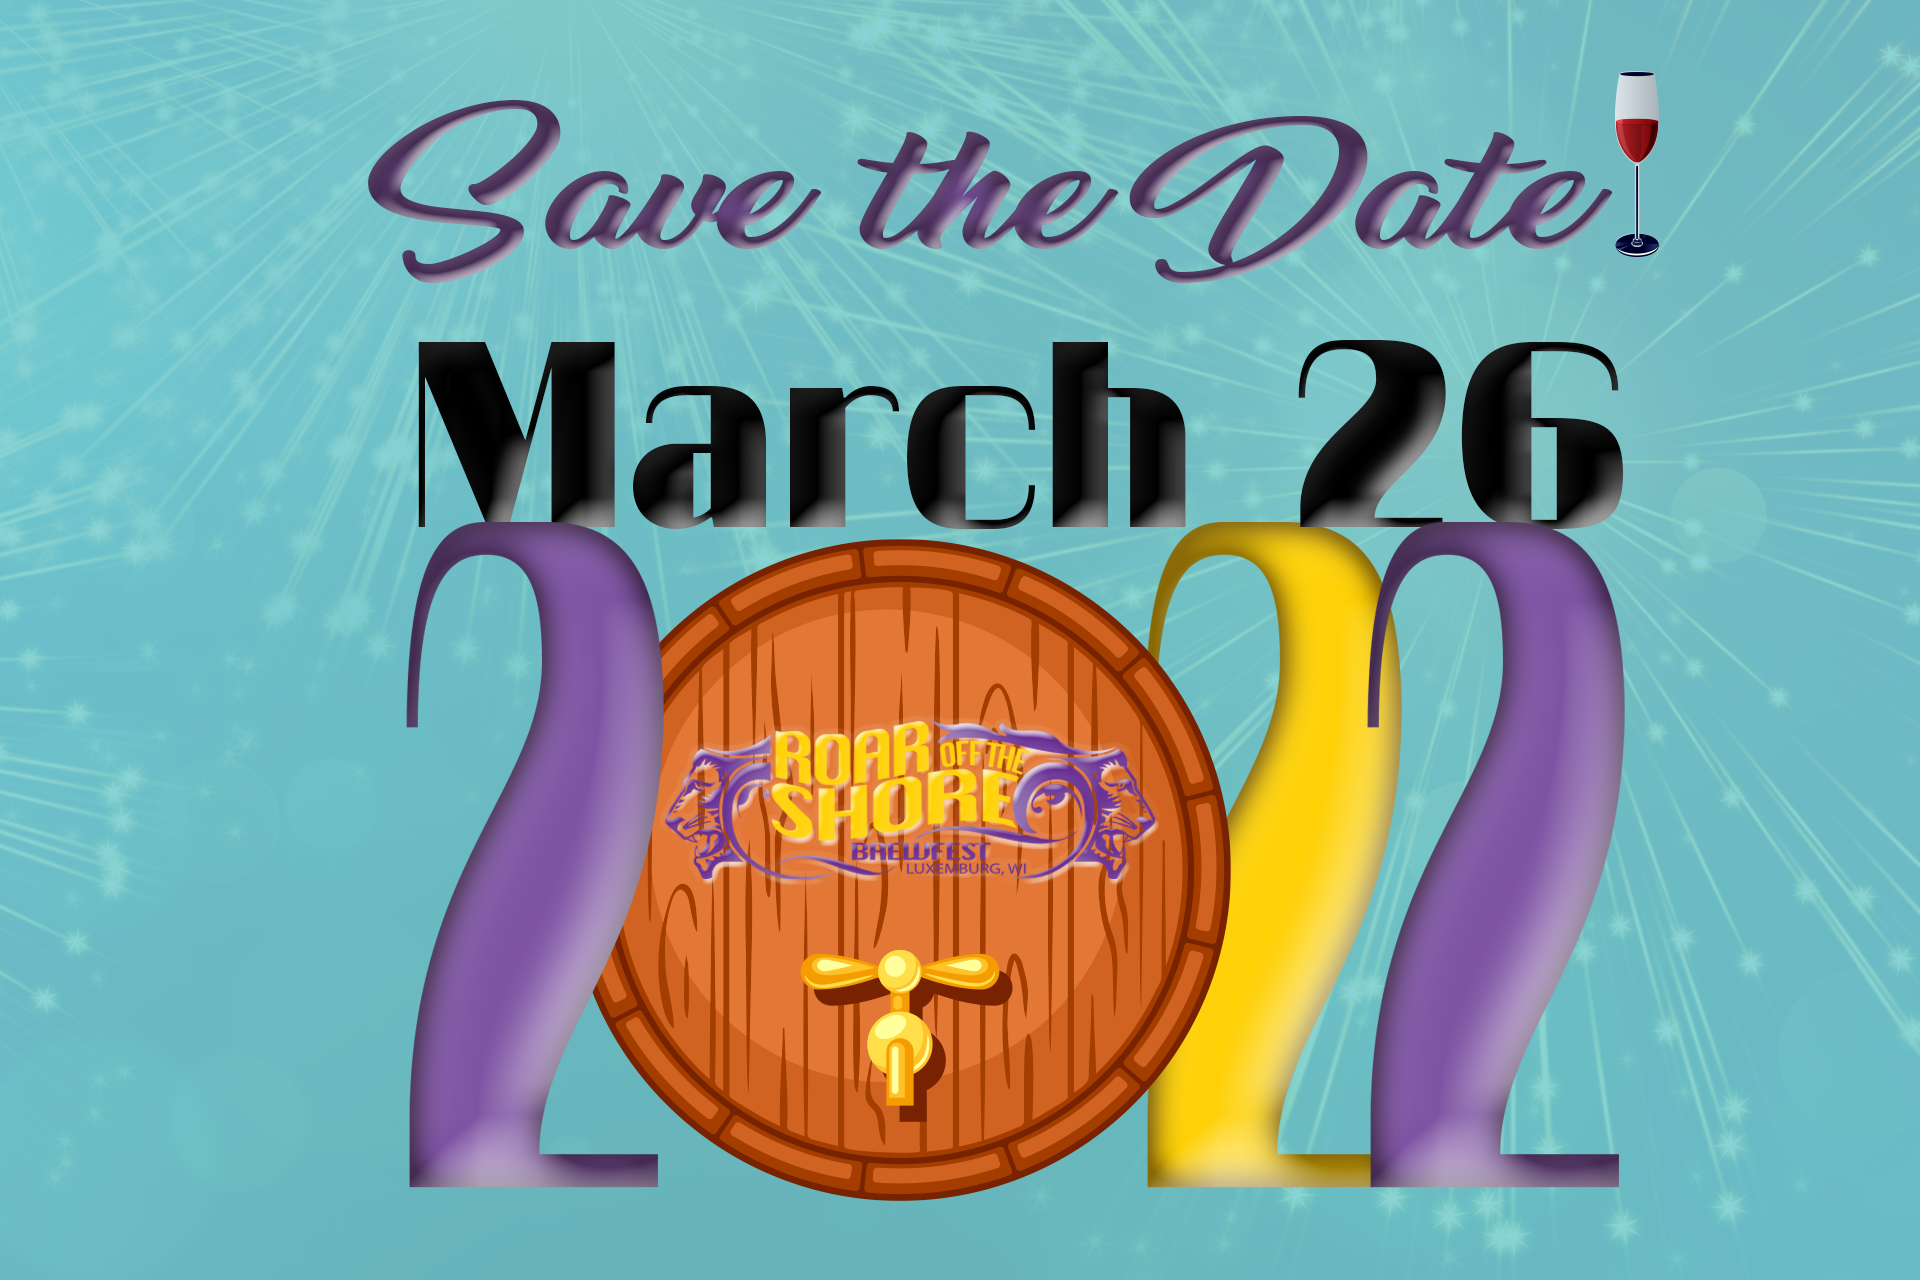 Roar off the Shore - 2022 Event Information